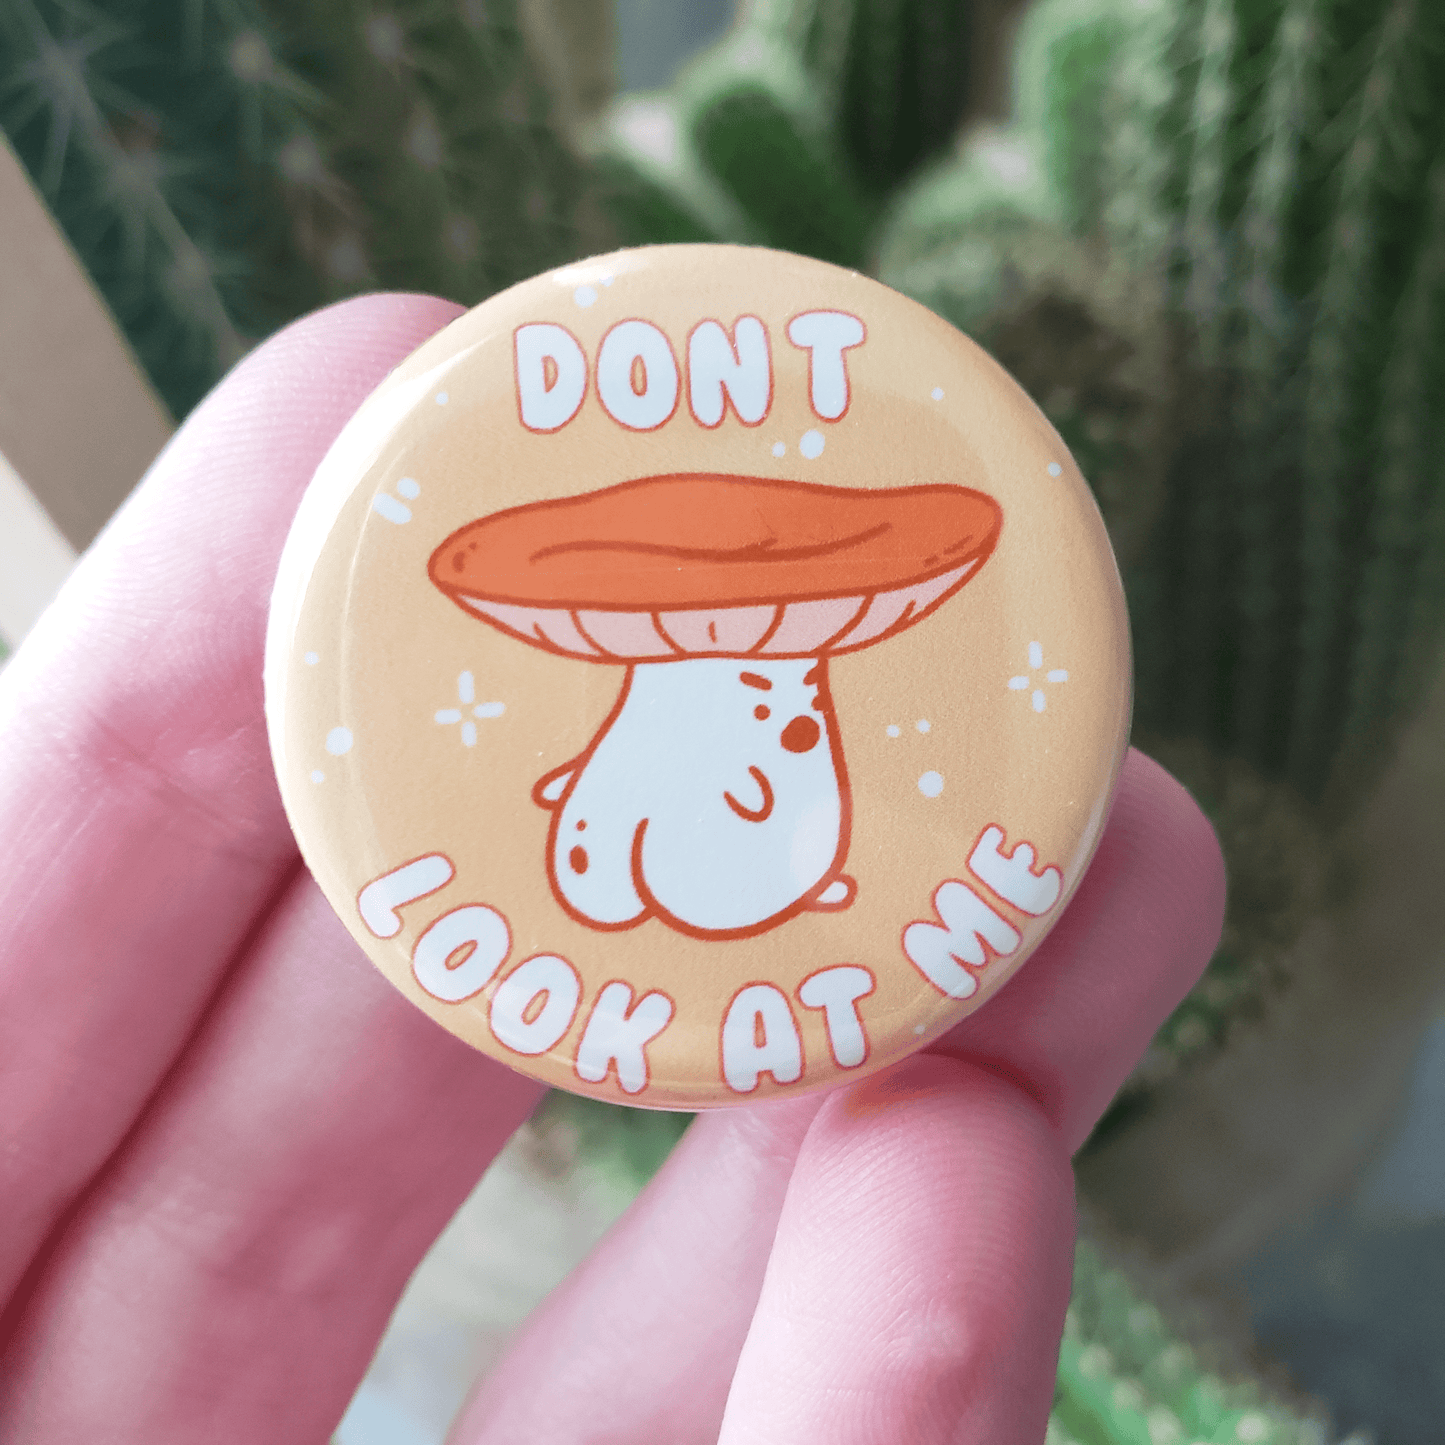 Don't look at me Button